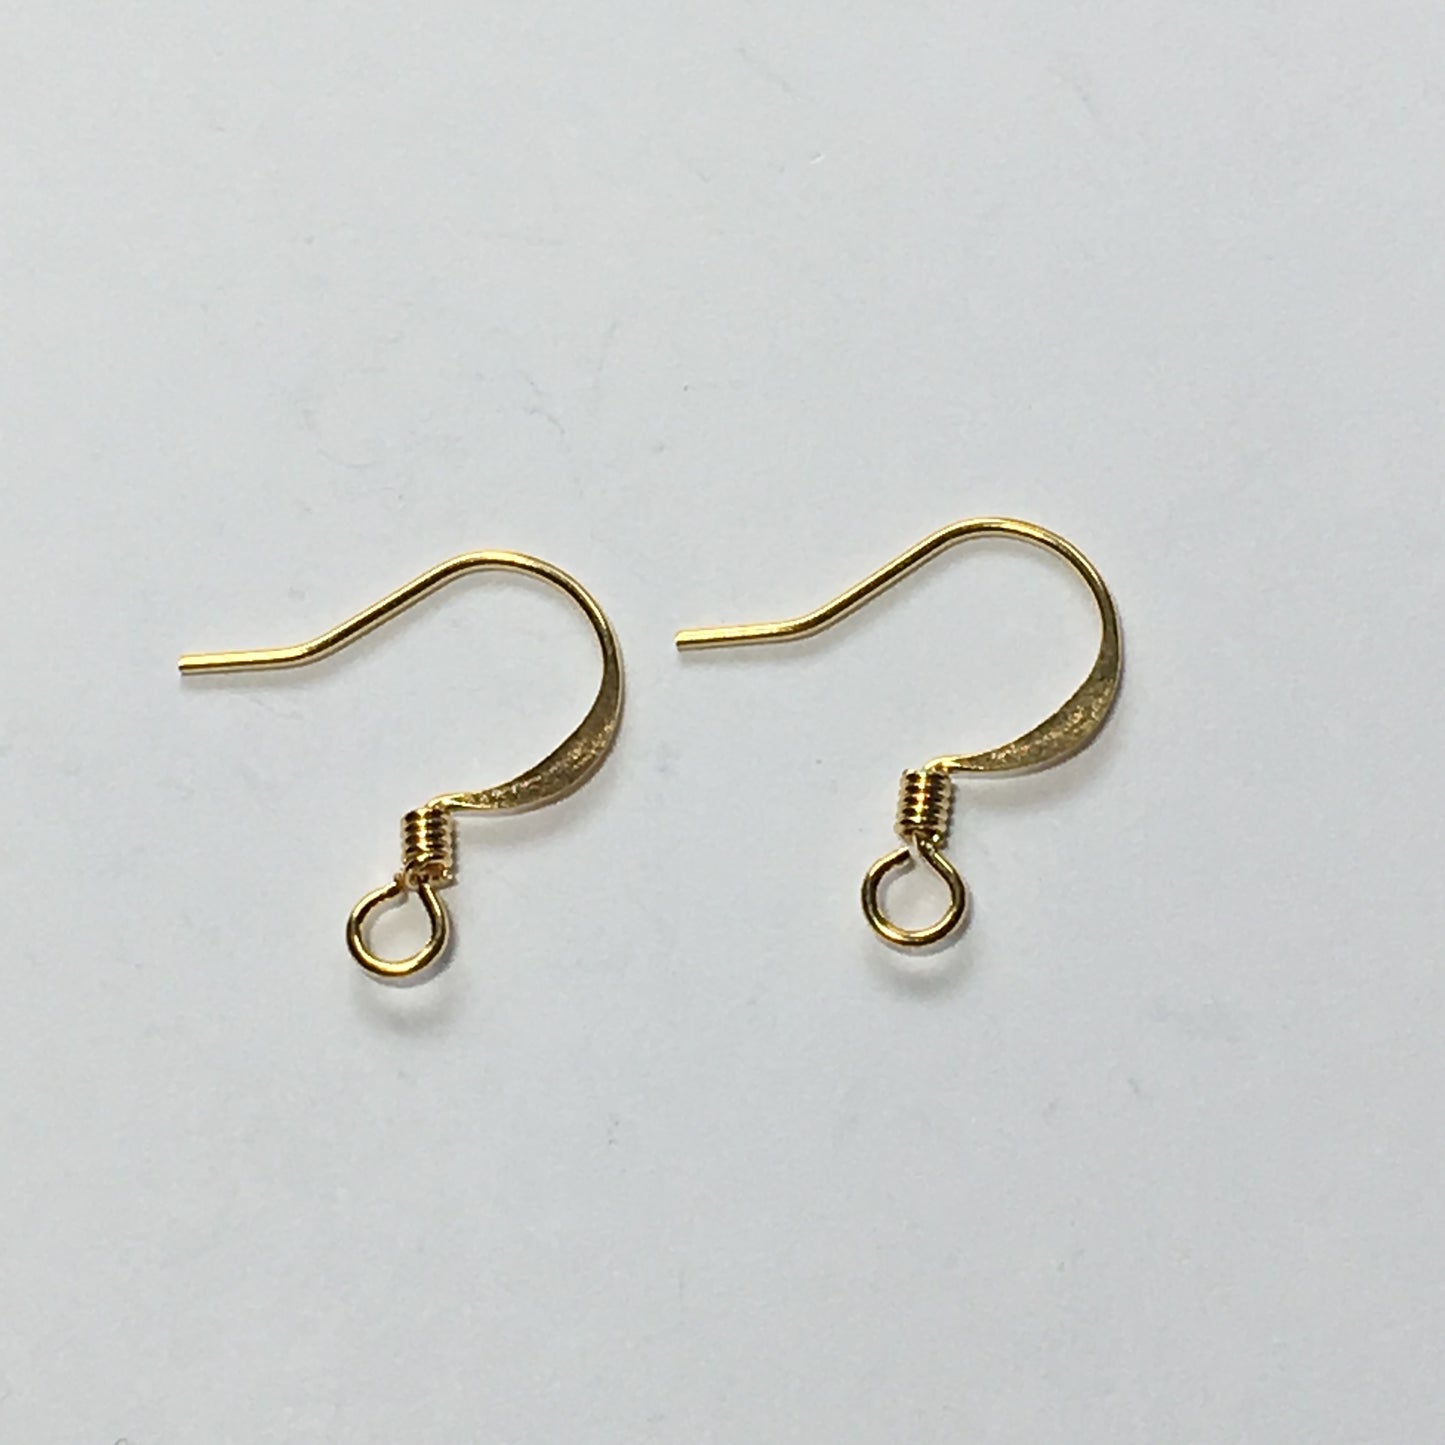 22-Gauge 16 mm Gold Flattened French Fish Hook Ear Wires - 1, 5 or 10 Pair